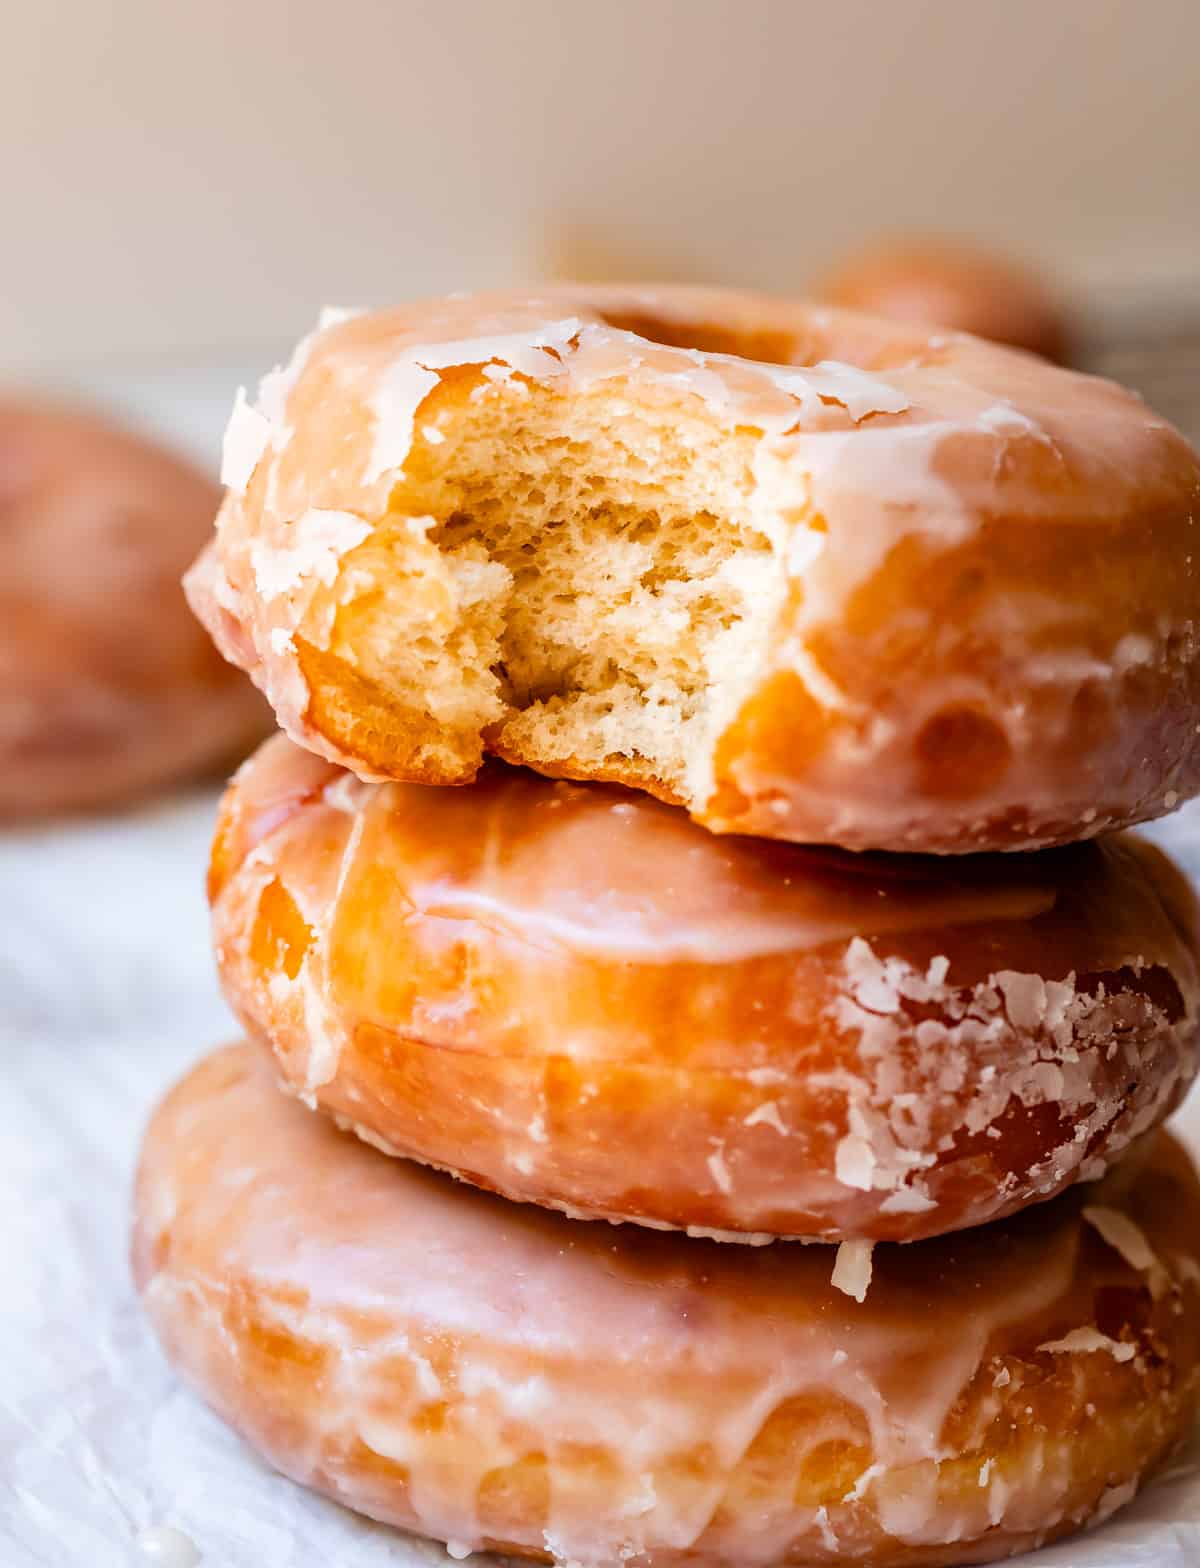 stack of three yeast donuts on parchment paper, with a bite taken out of the top donut.